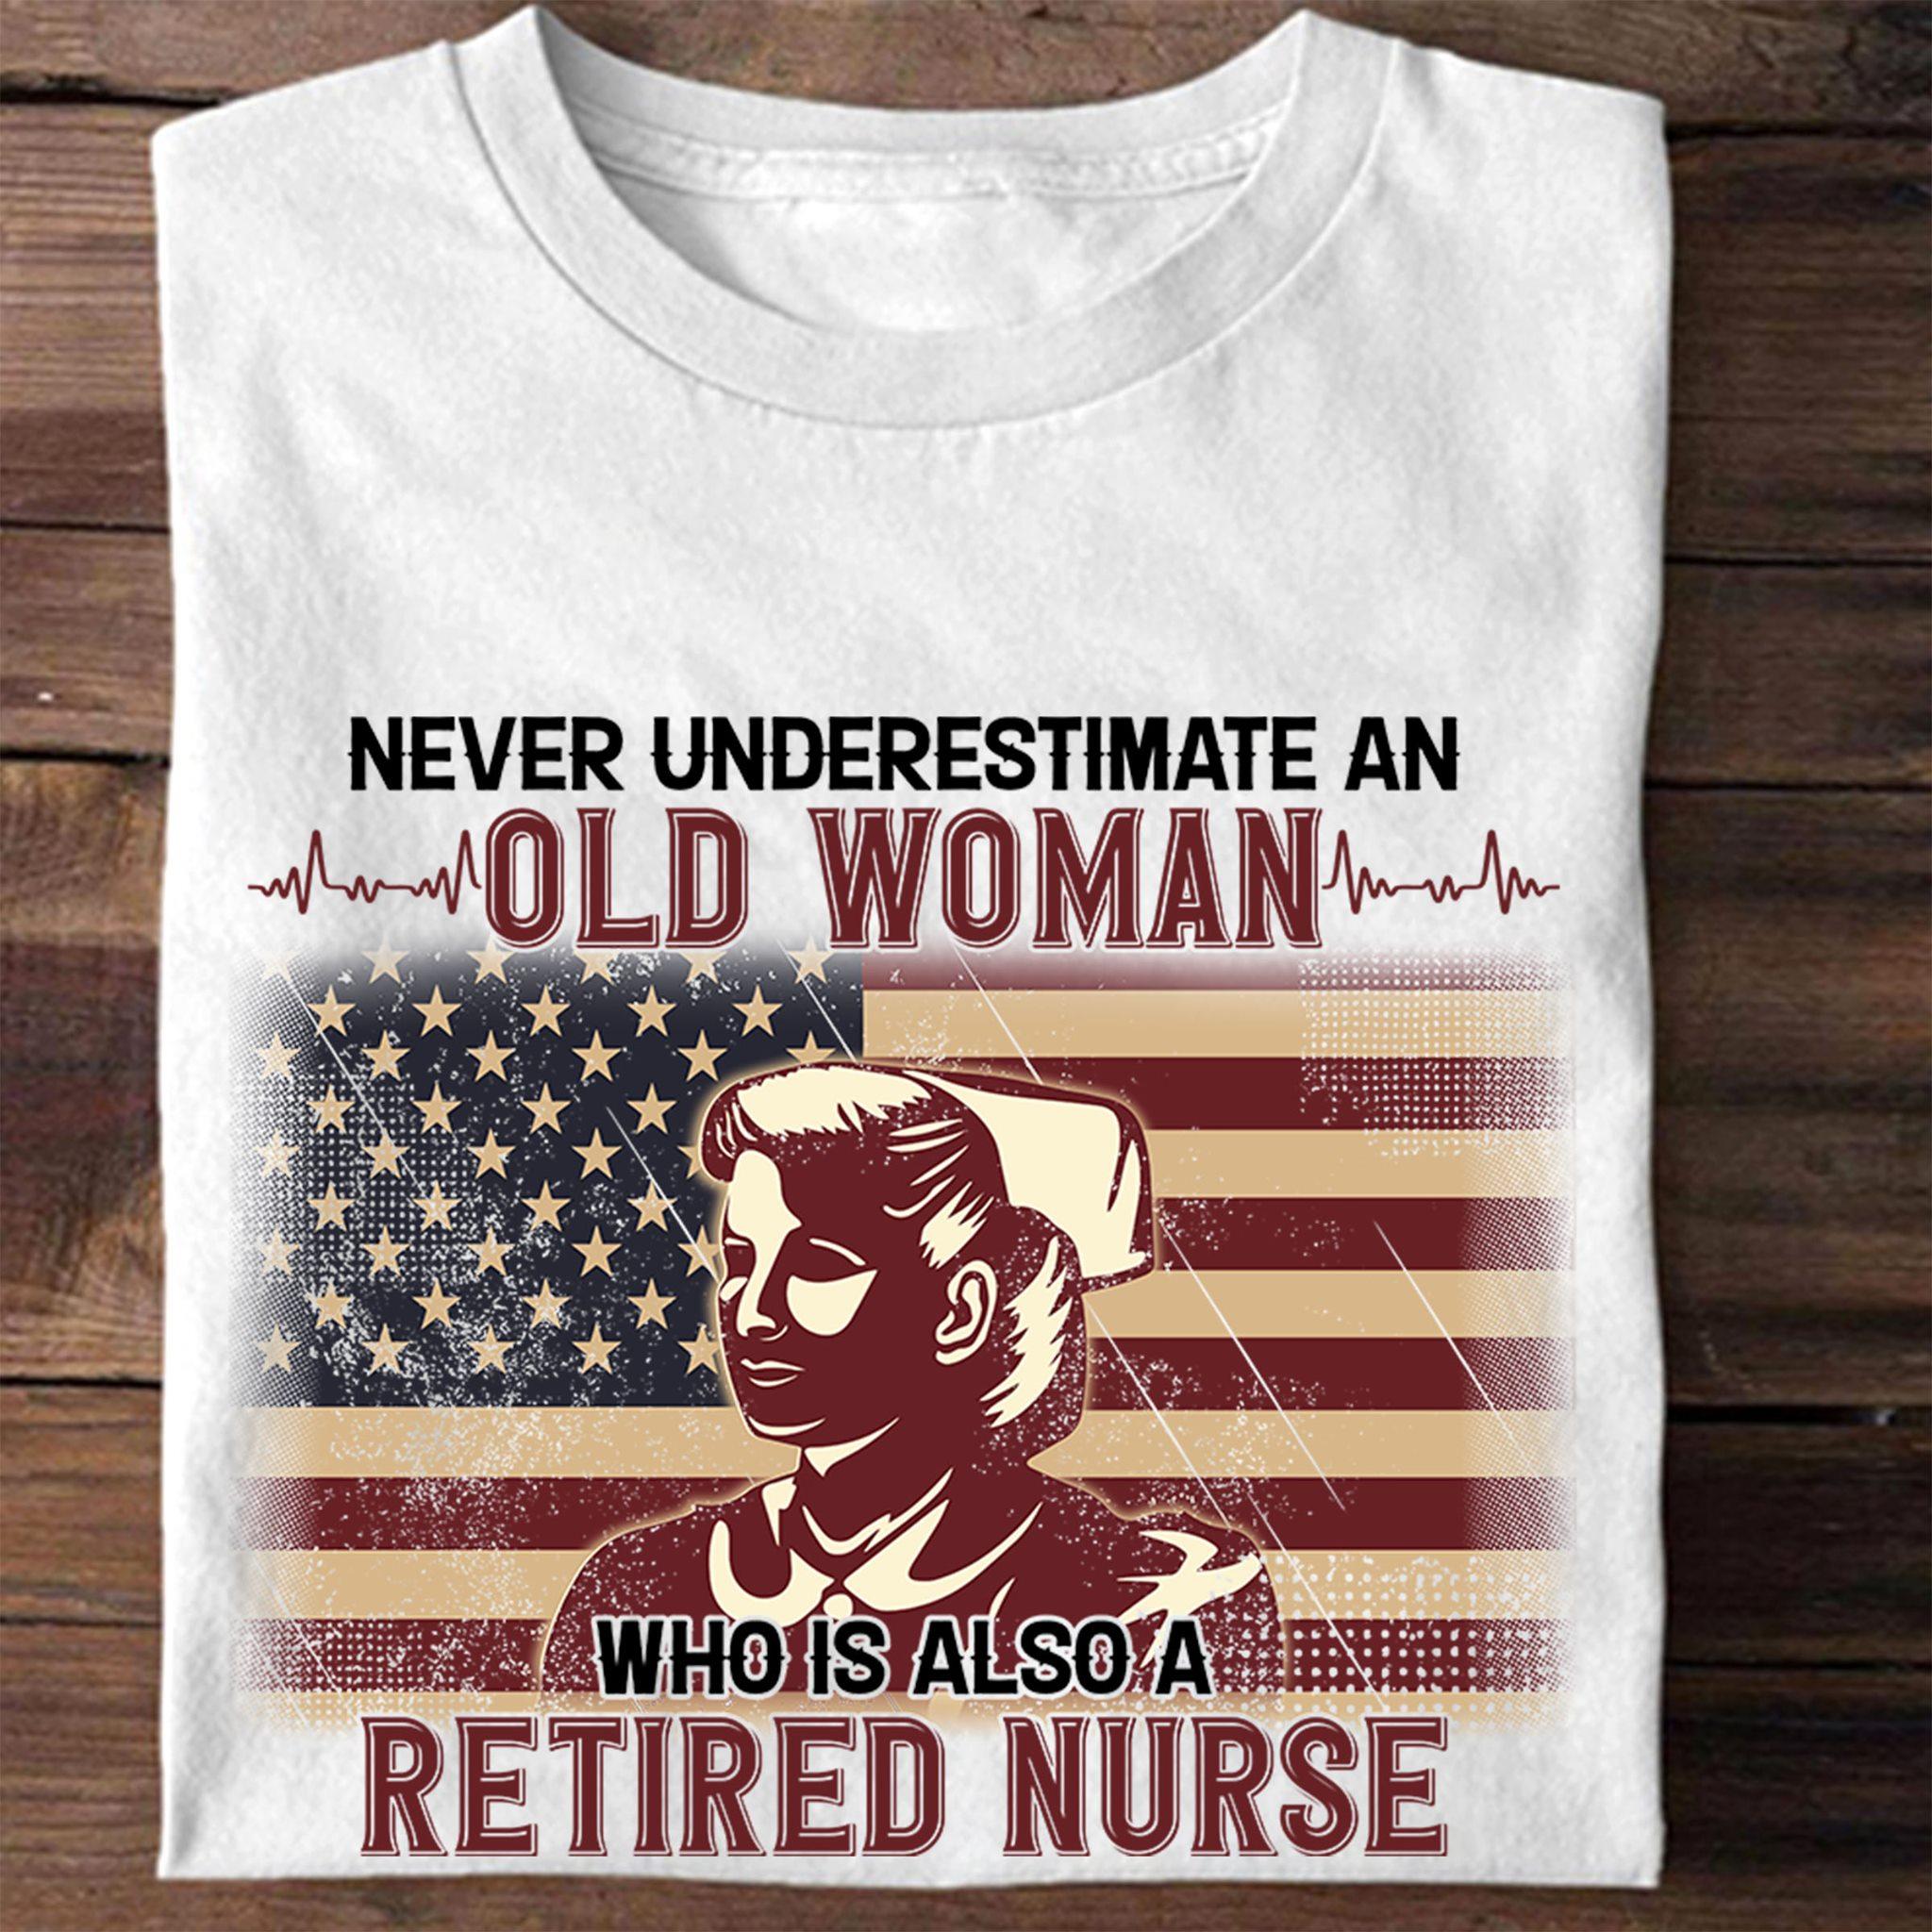 Never underestimate an old woman who is also a retired nurse